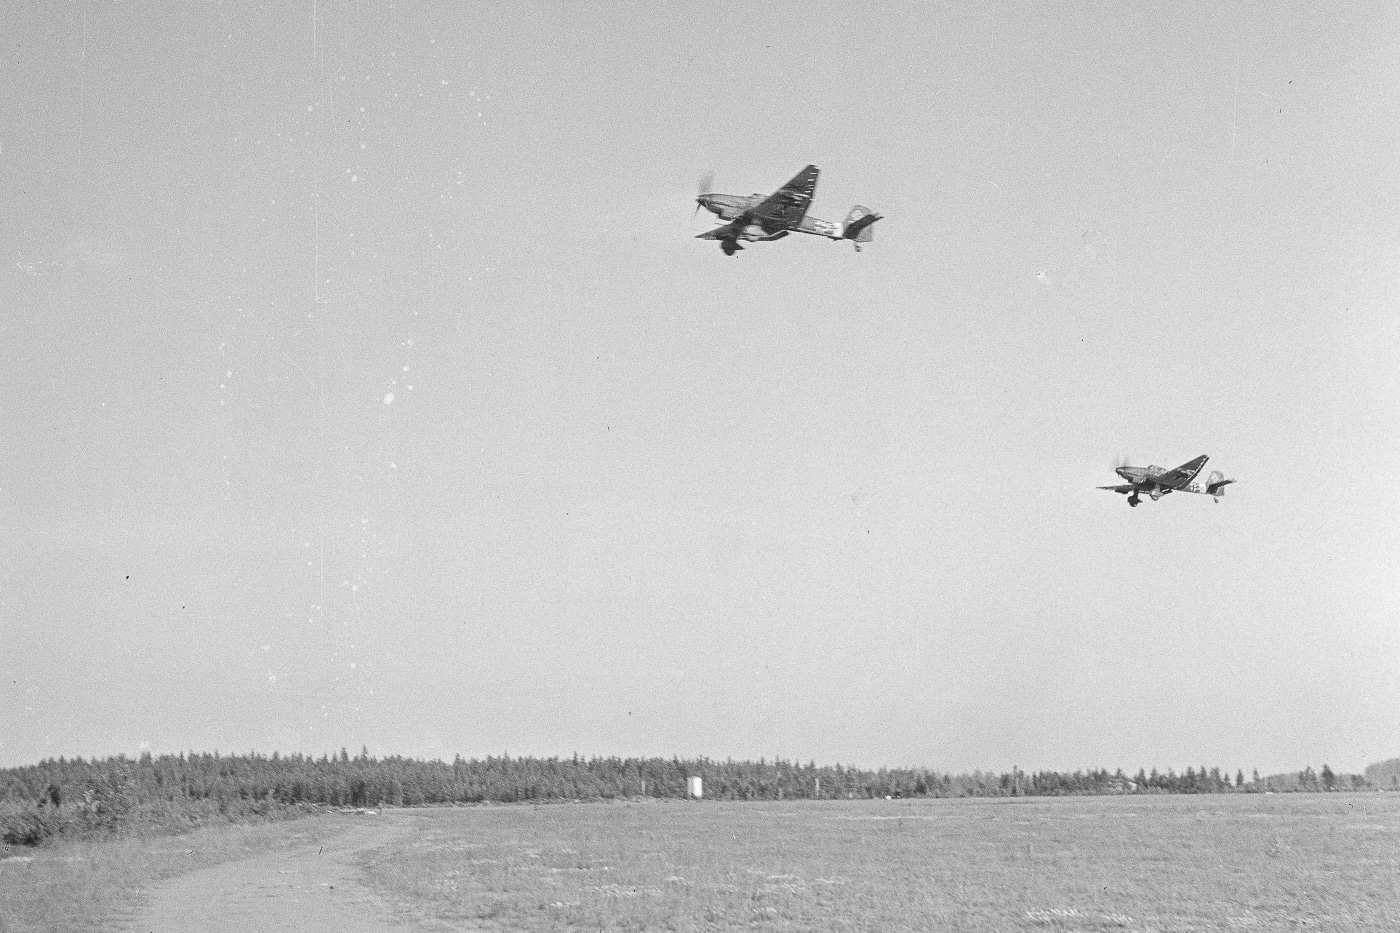 In this photo we see a pair of Stuka dive bombers take off to attack Red Army troops of the Soviet Union. The Workers' and Peasants' Red Army, often shortened to the Red Army, was the army and air force of the Russian Soviet Republic and, from 1922, the Soviet Union.